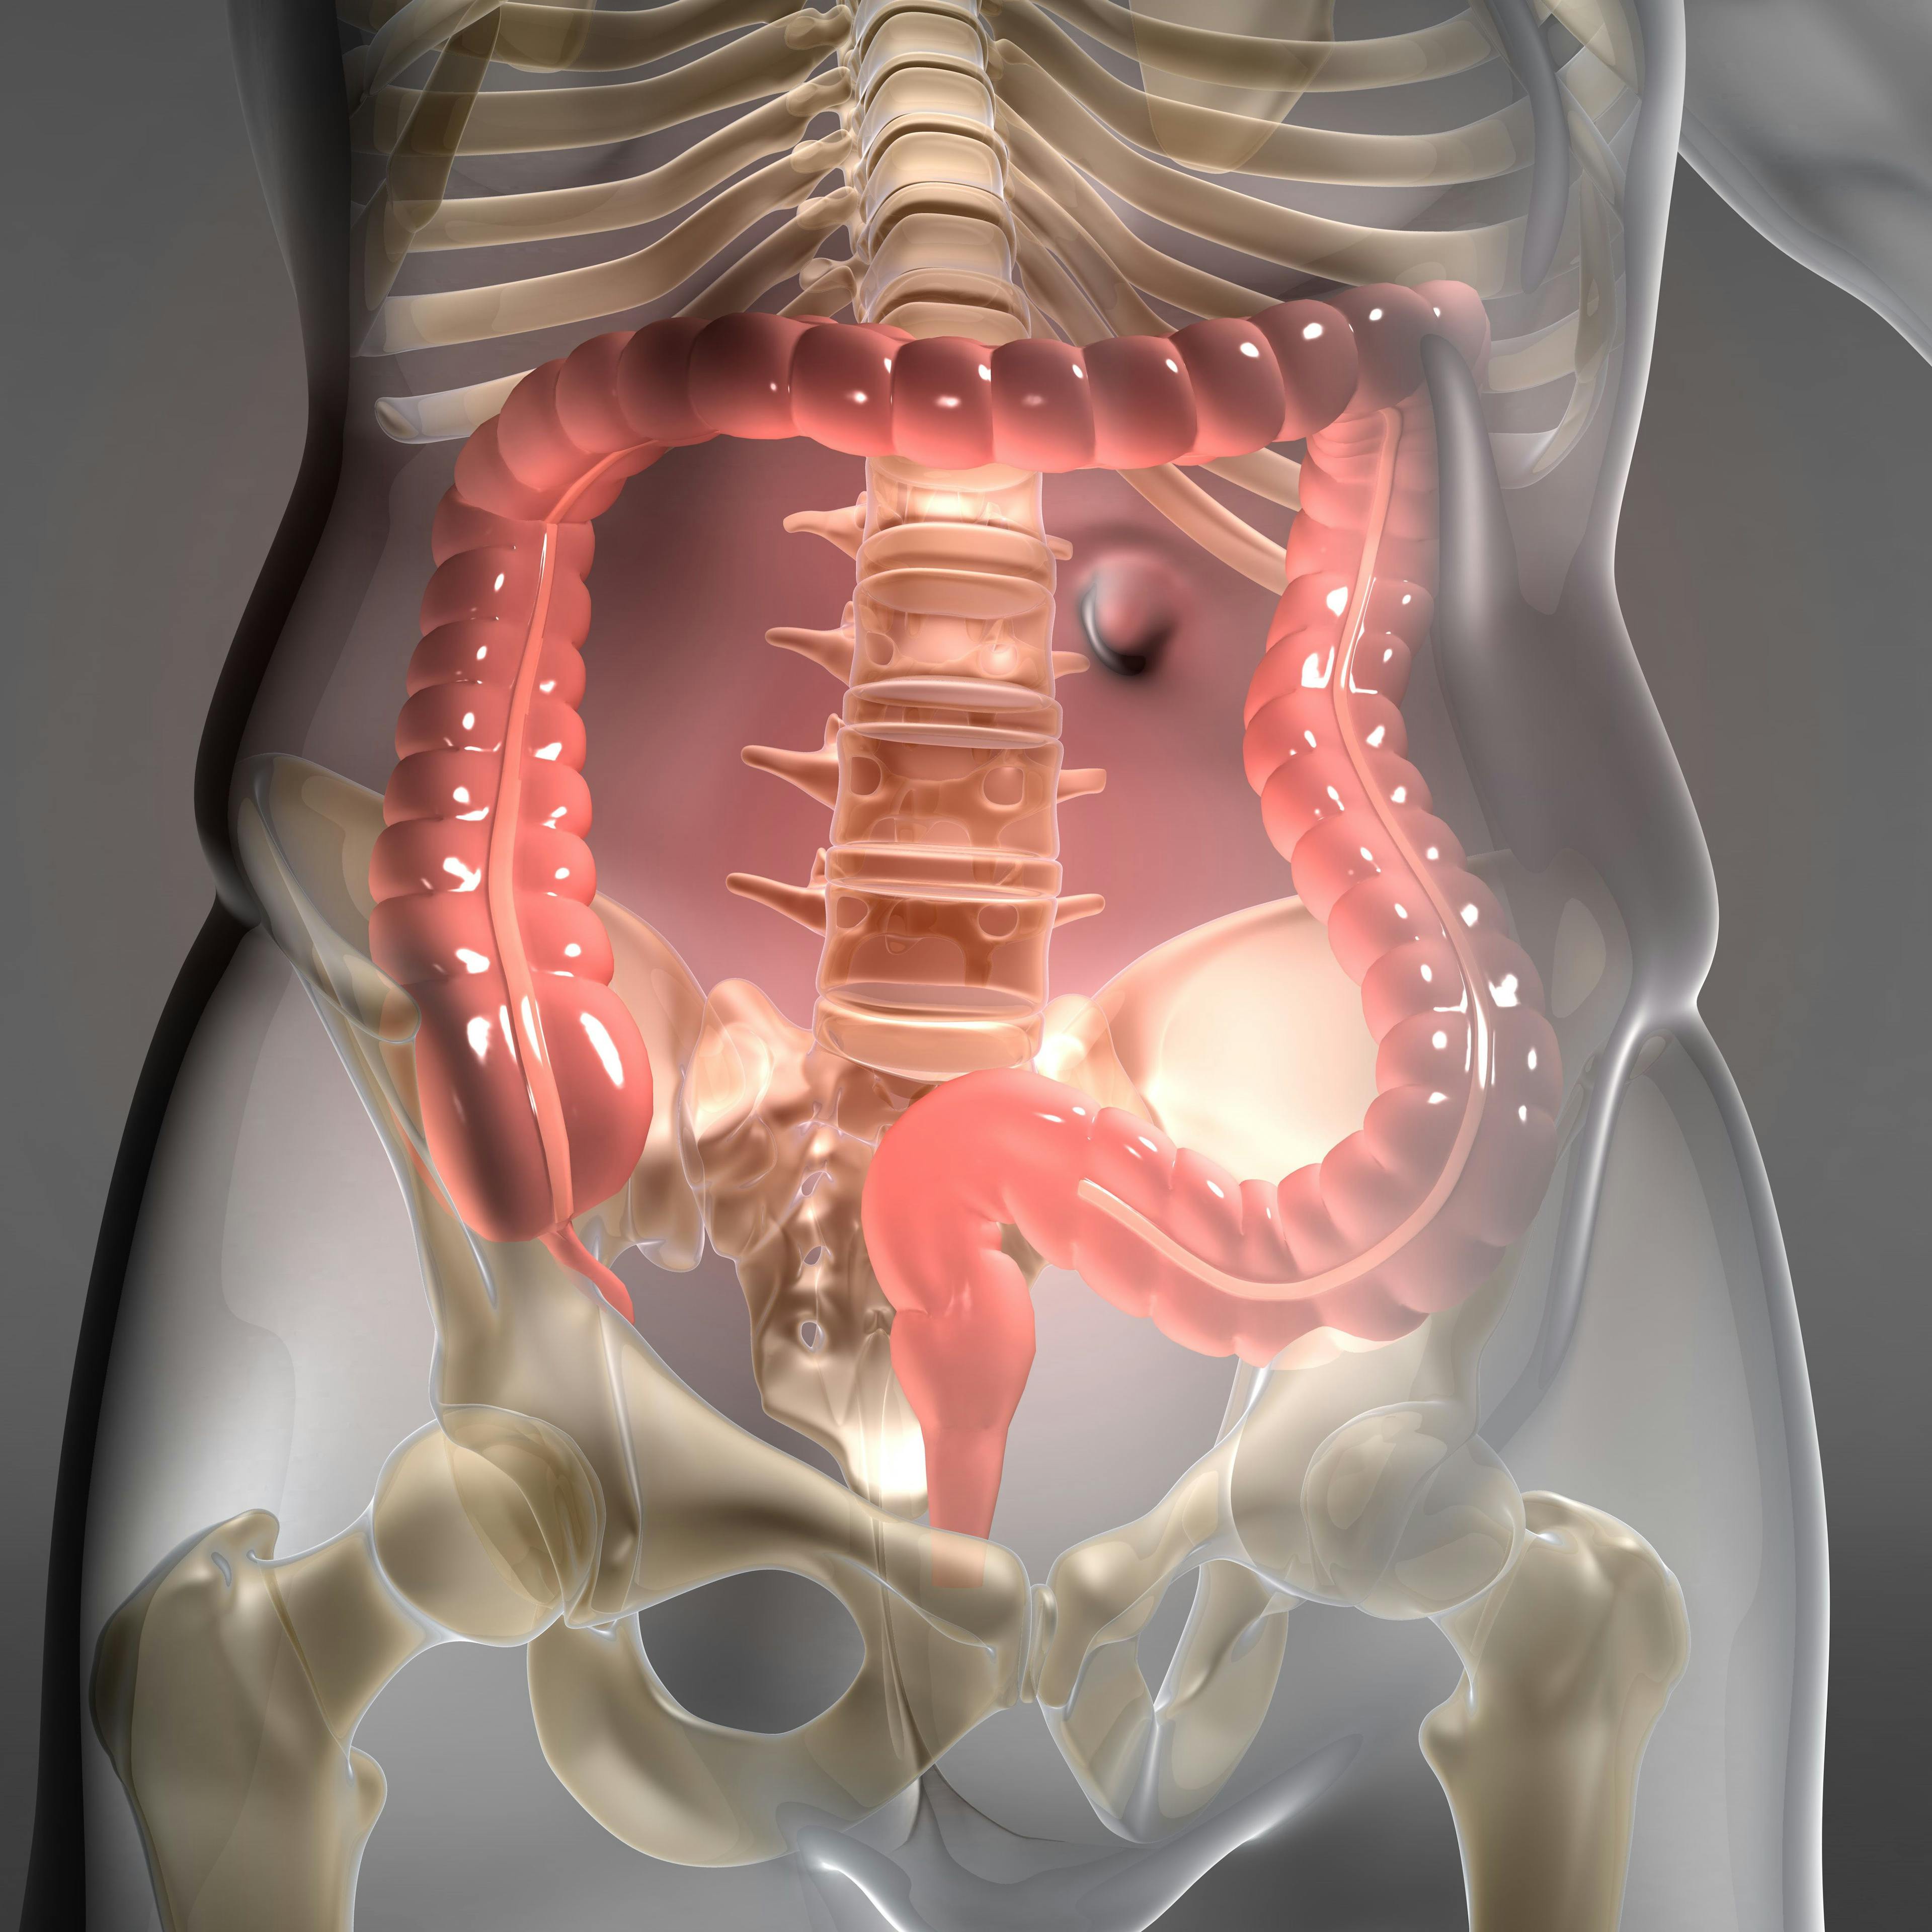 Patients with previously treated HER2-positive metastatic colorectal cancer experienced durable responses following treatment with tucatinib in combination with trastuzumab.